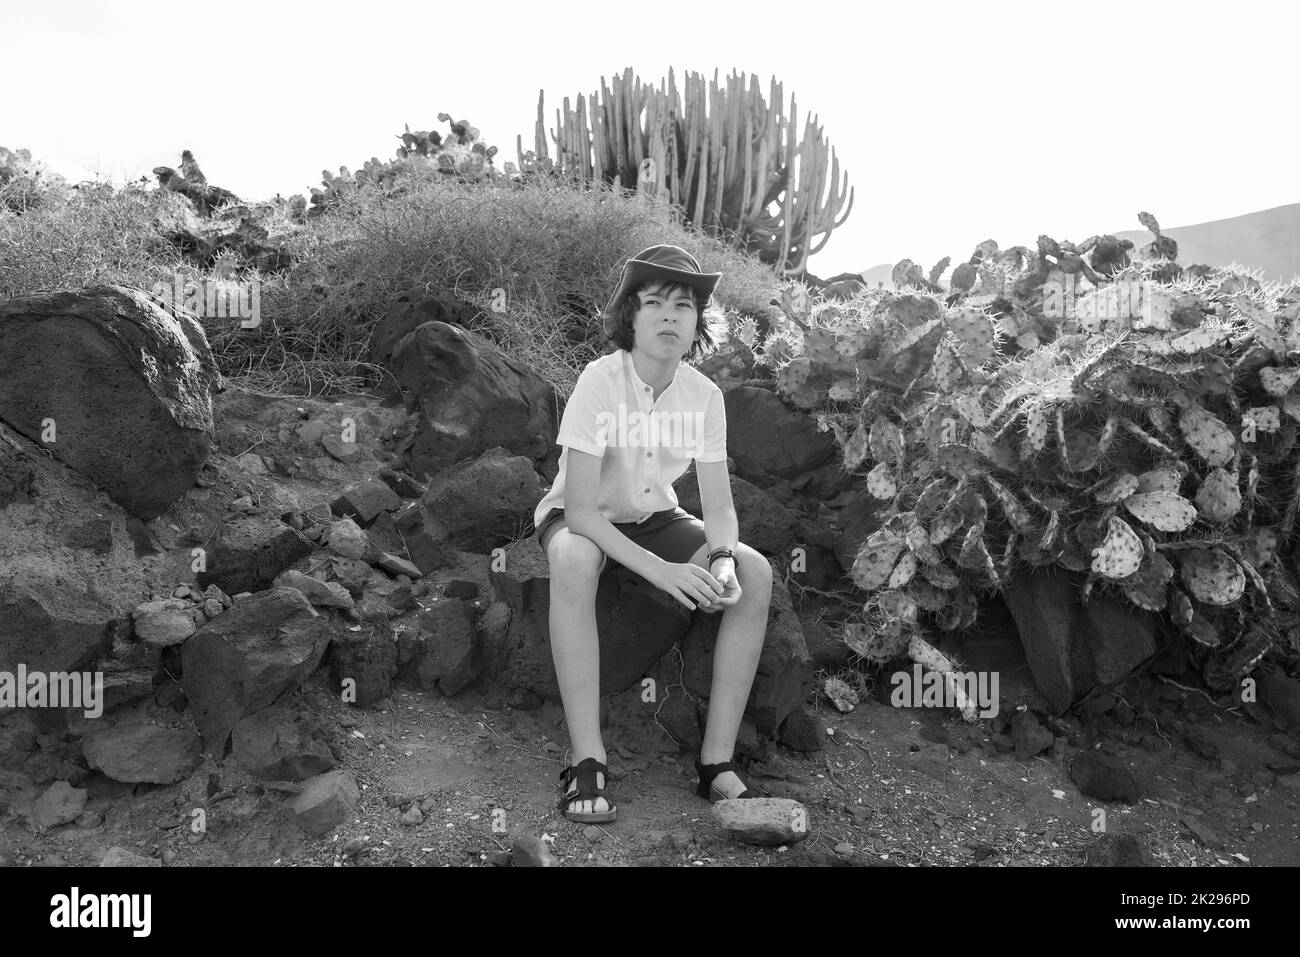 Portrait of a teenager in a polo shirt and a hat against the background of cacti. Black and white. Stock Photo